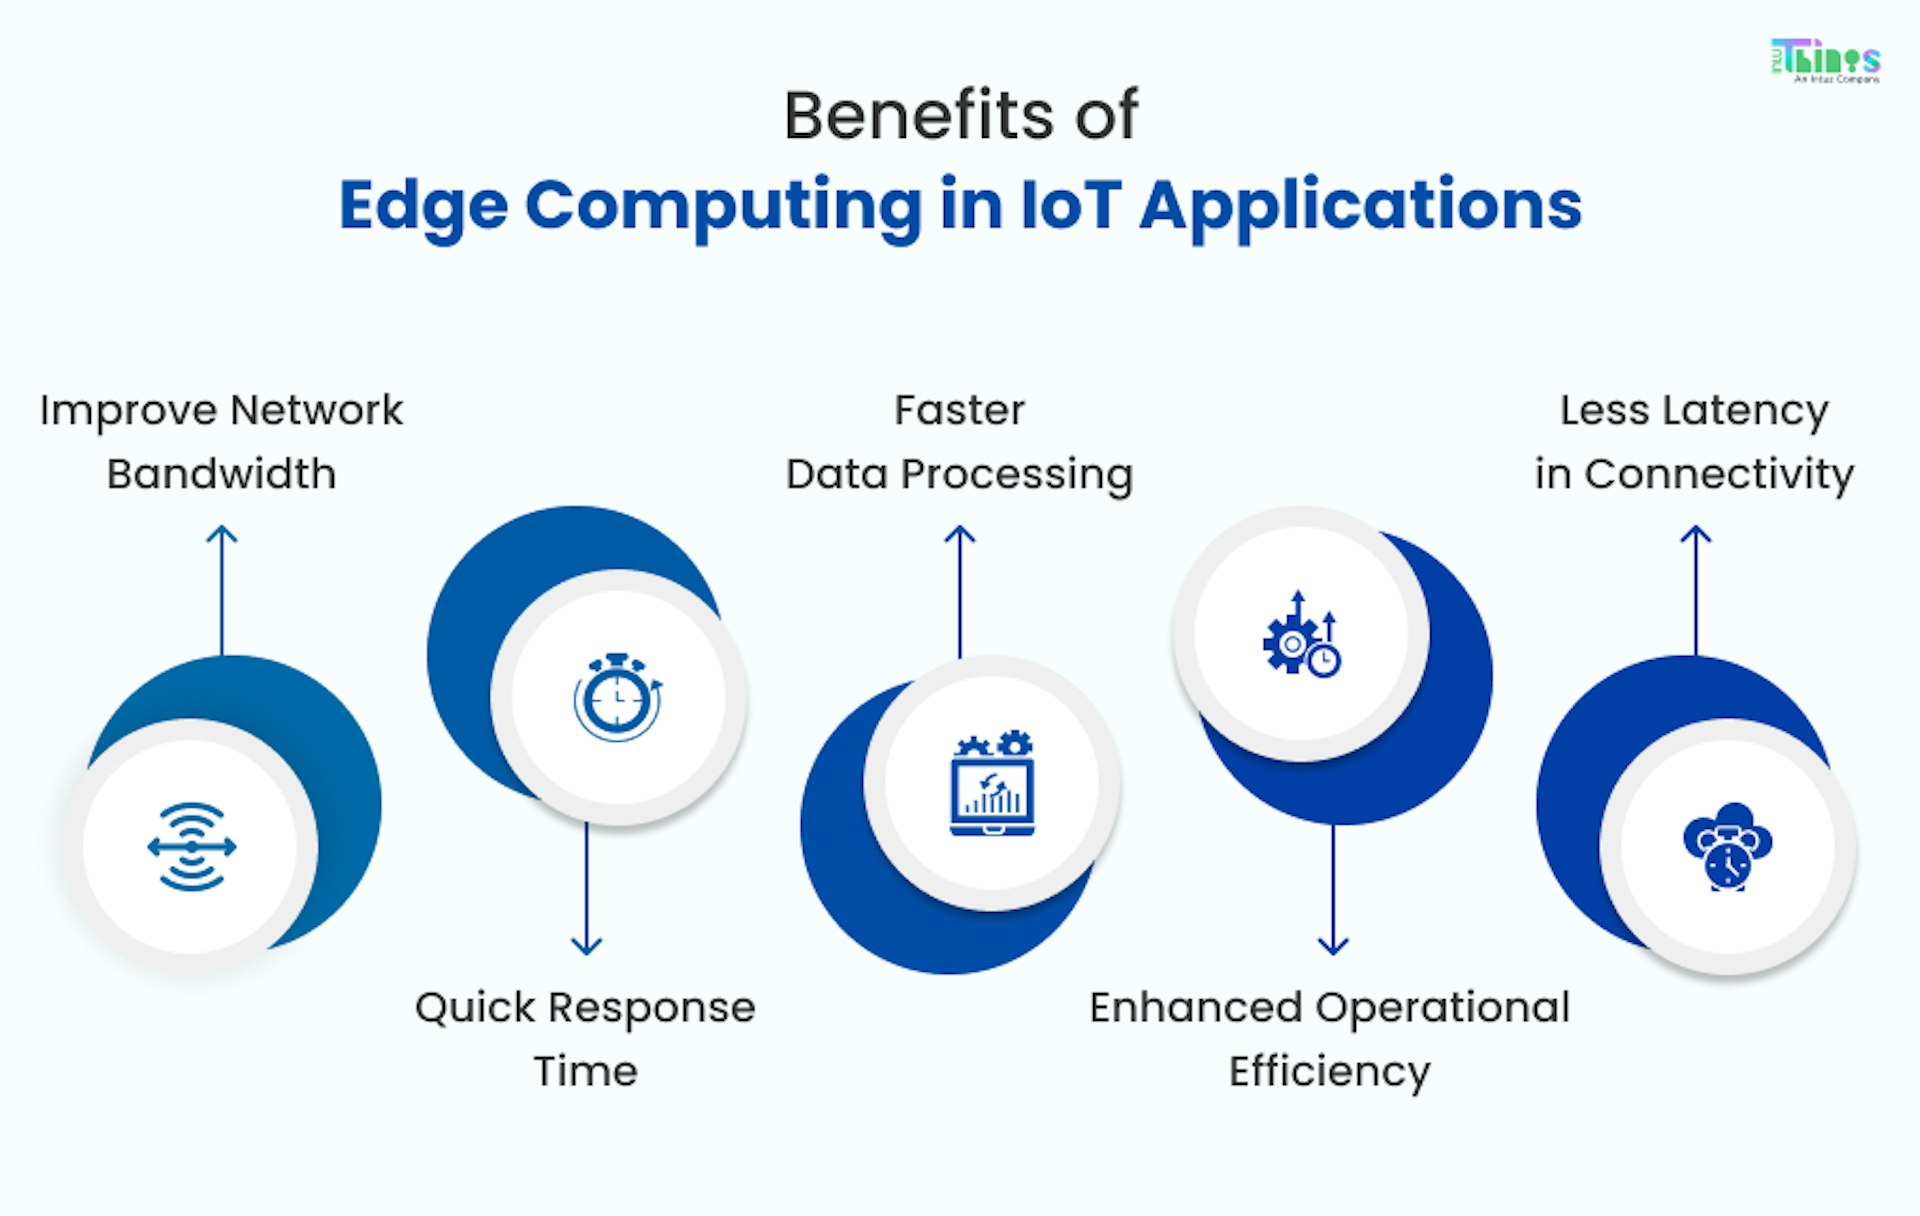 Benefits of Edge Computing in IoT Applications